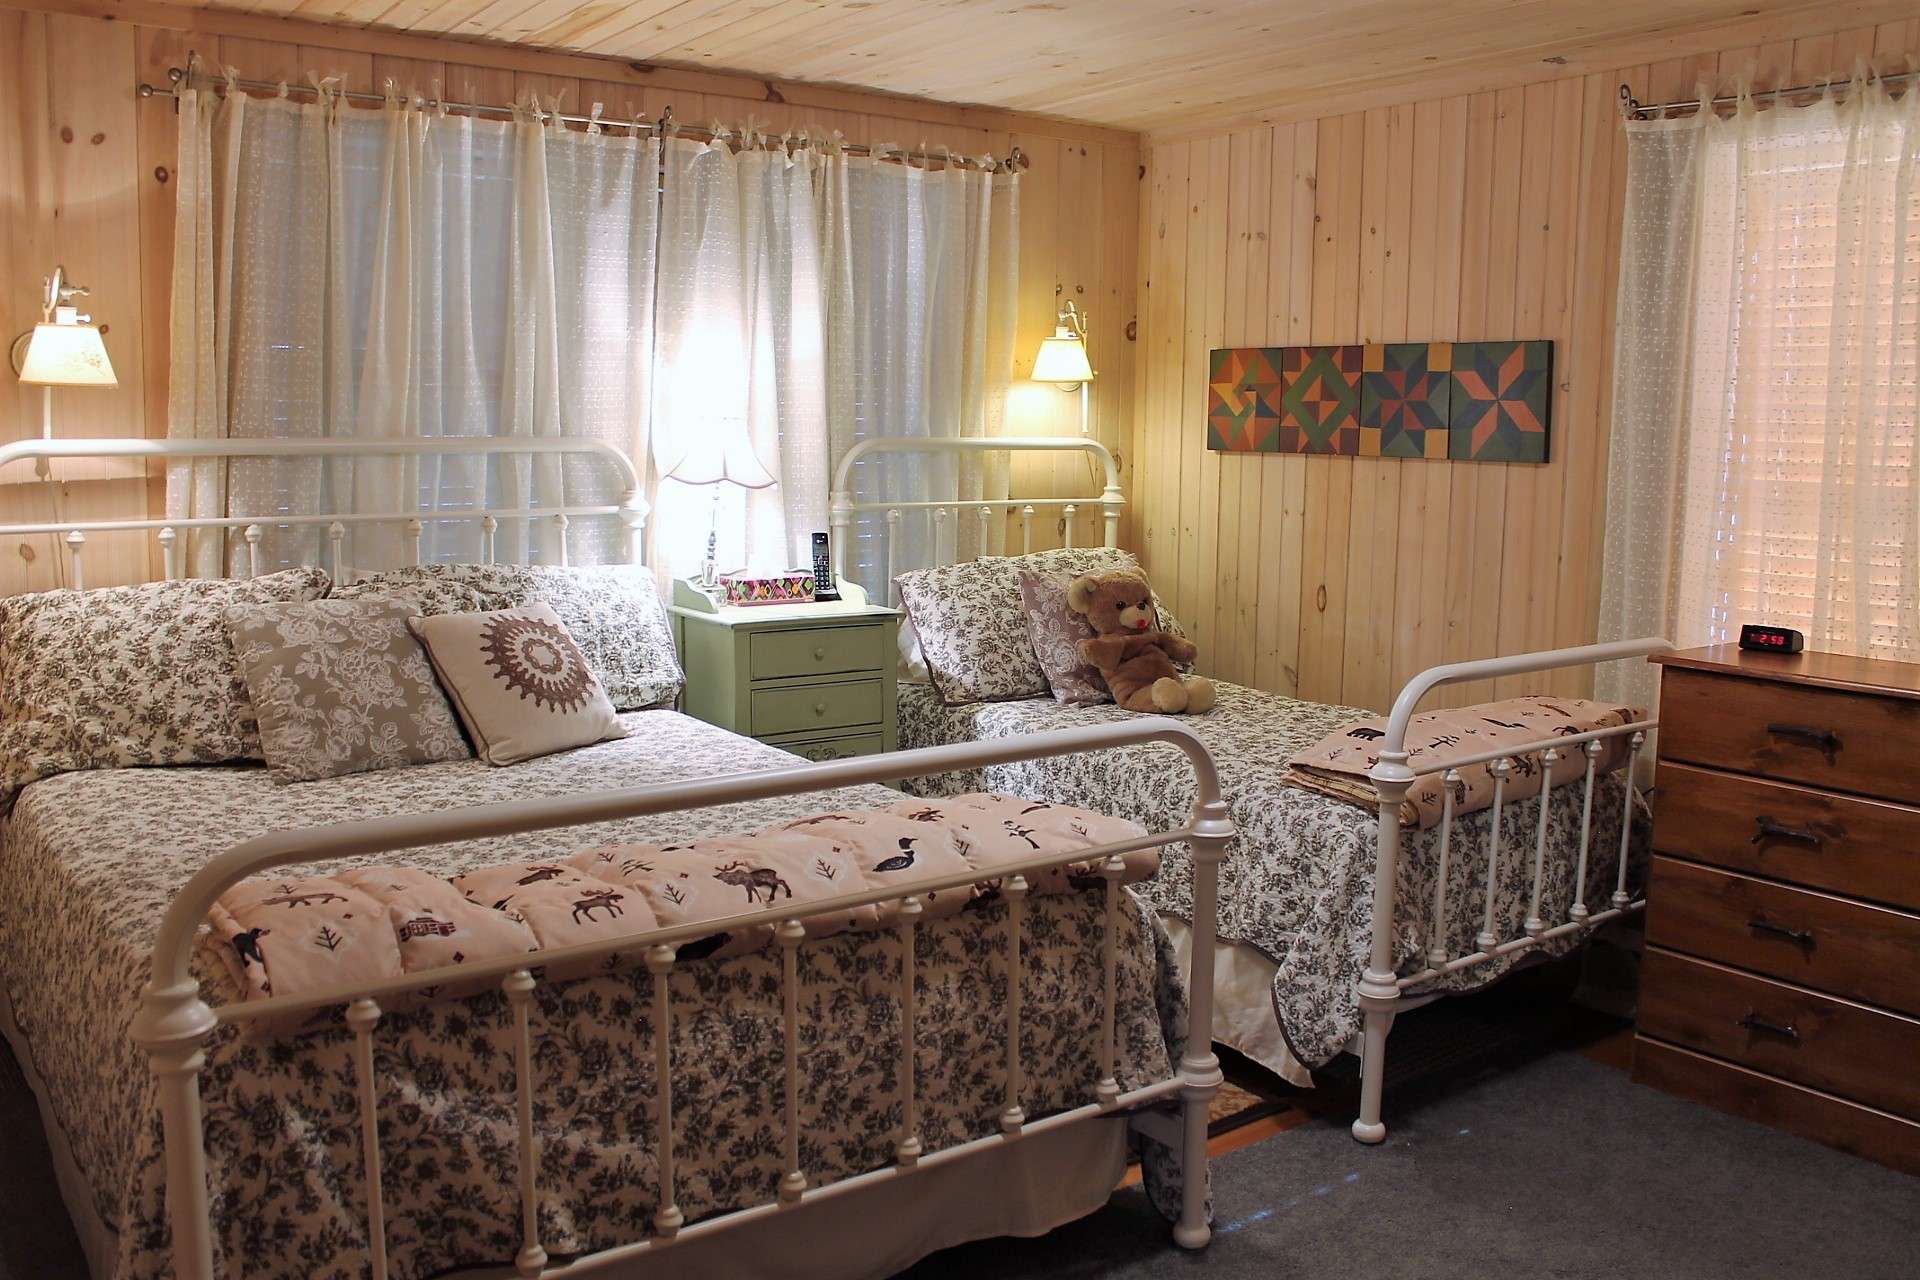 Lower level has a spacious and private guest bedroom with attached bath.